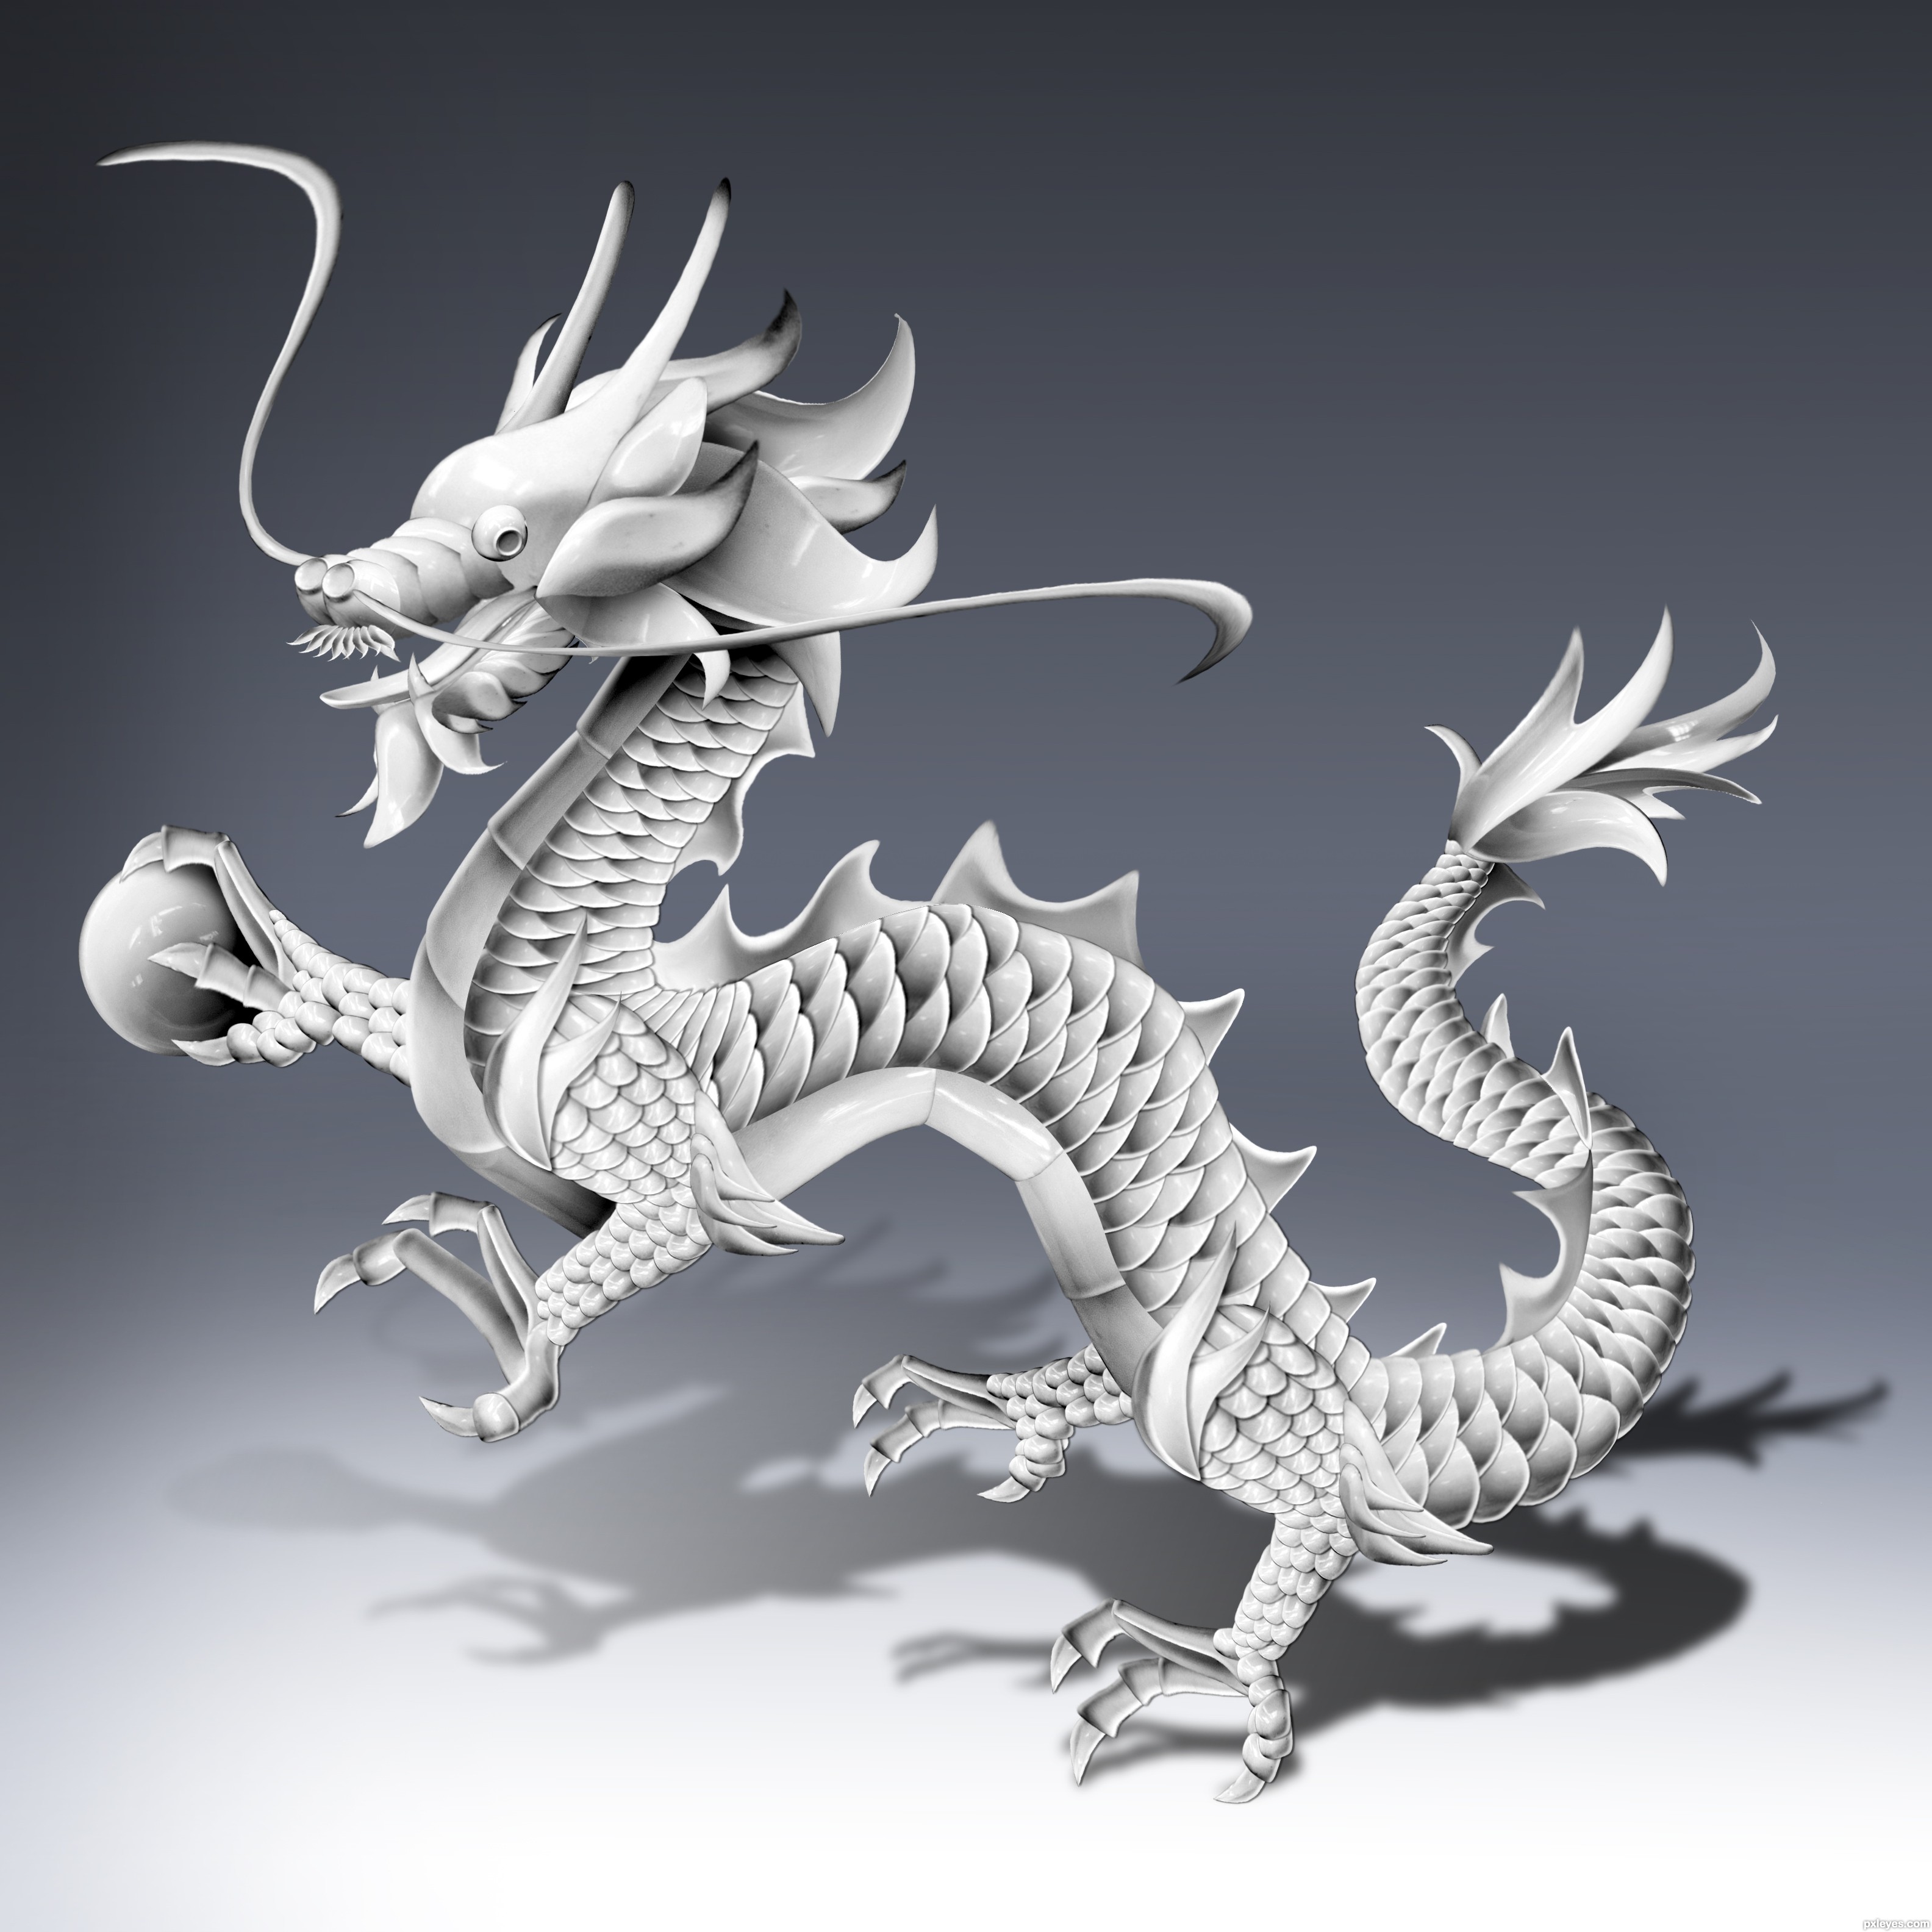 Chinese Dragon picture, by alan78chan for: white cups photoshop ...